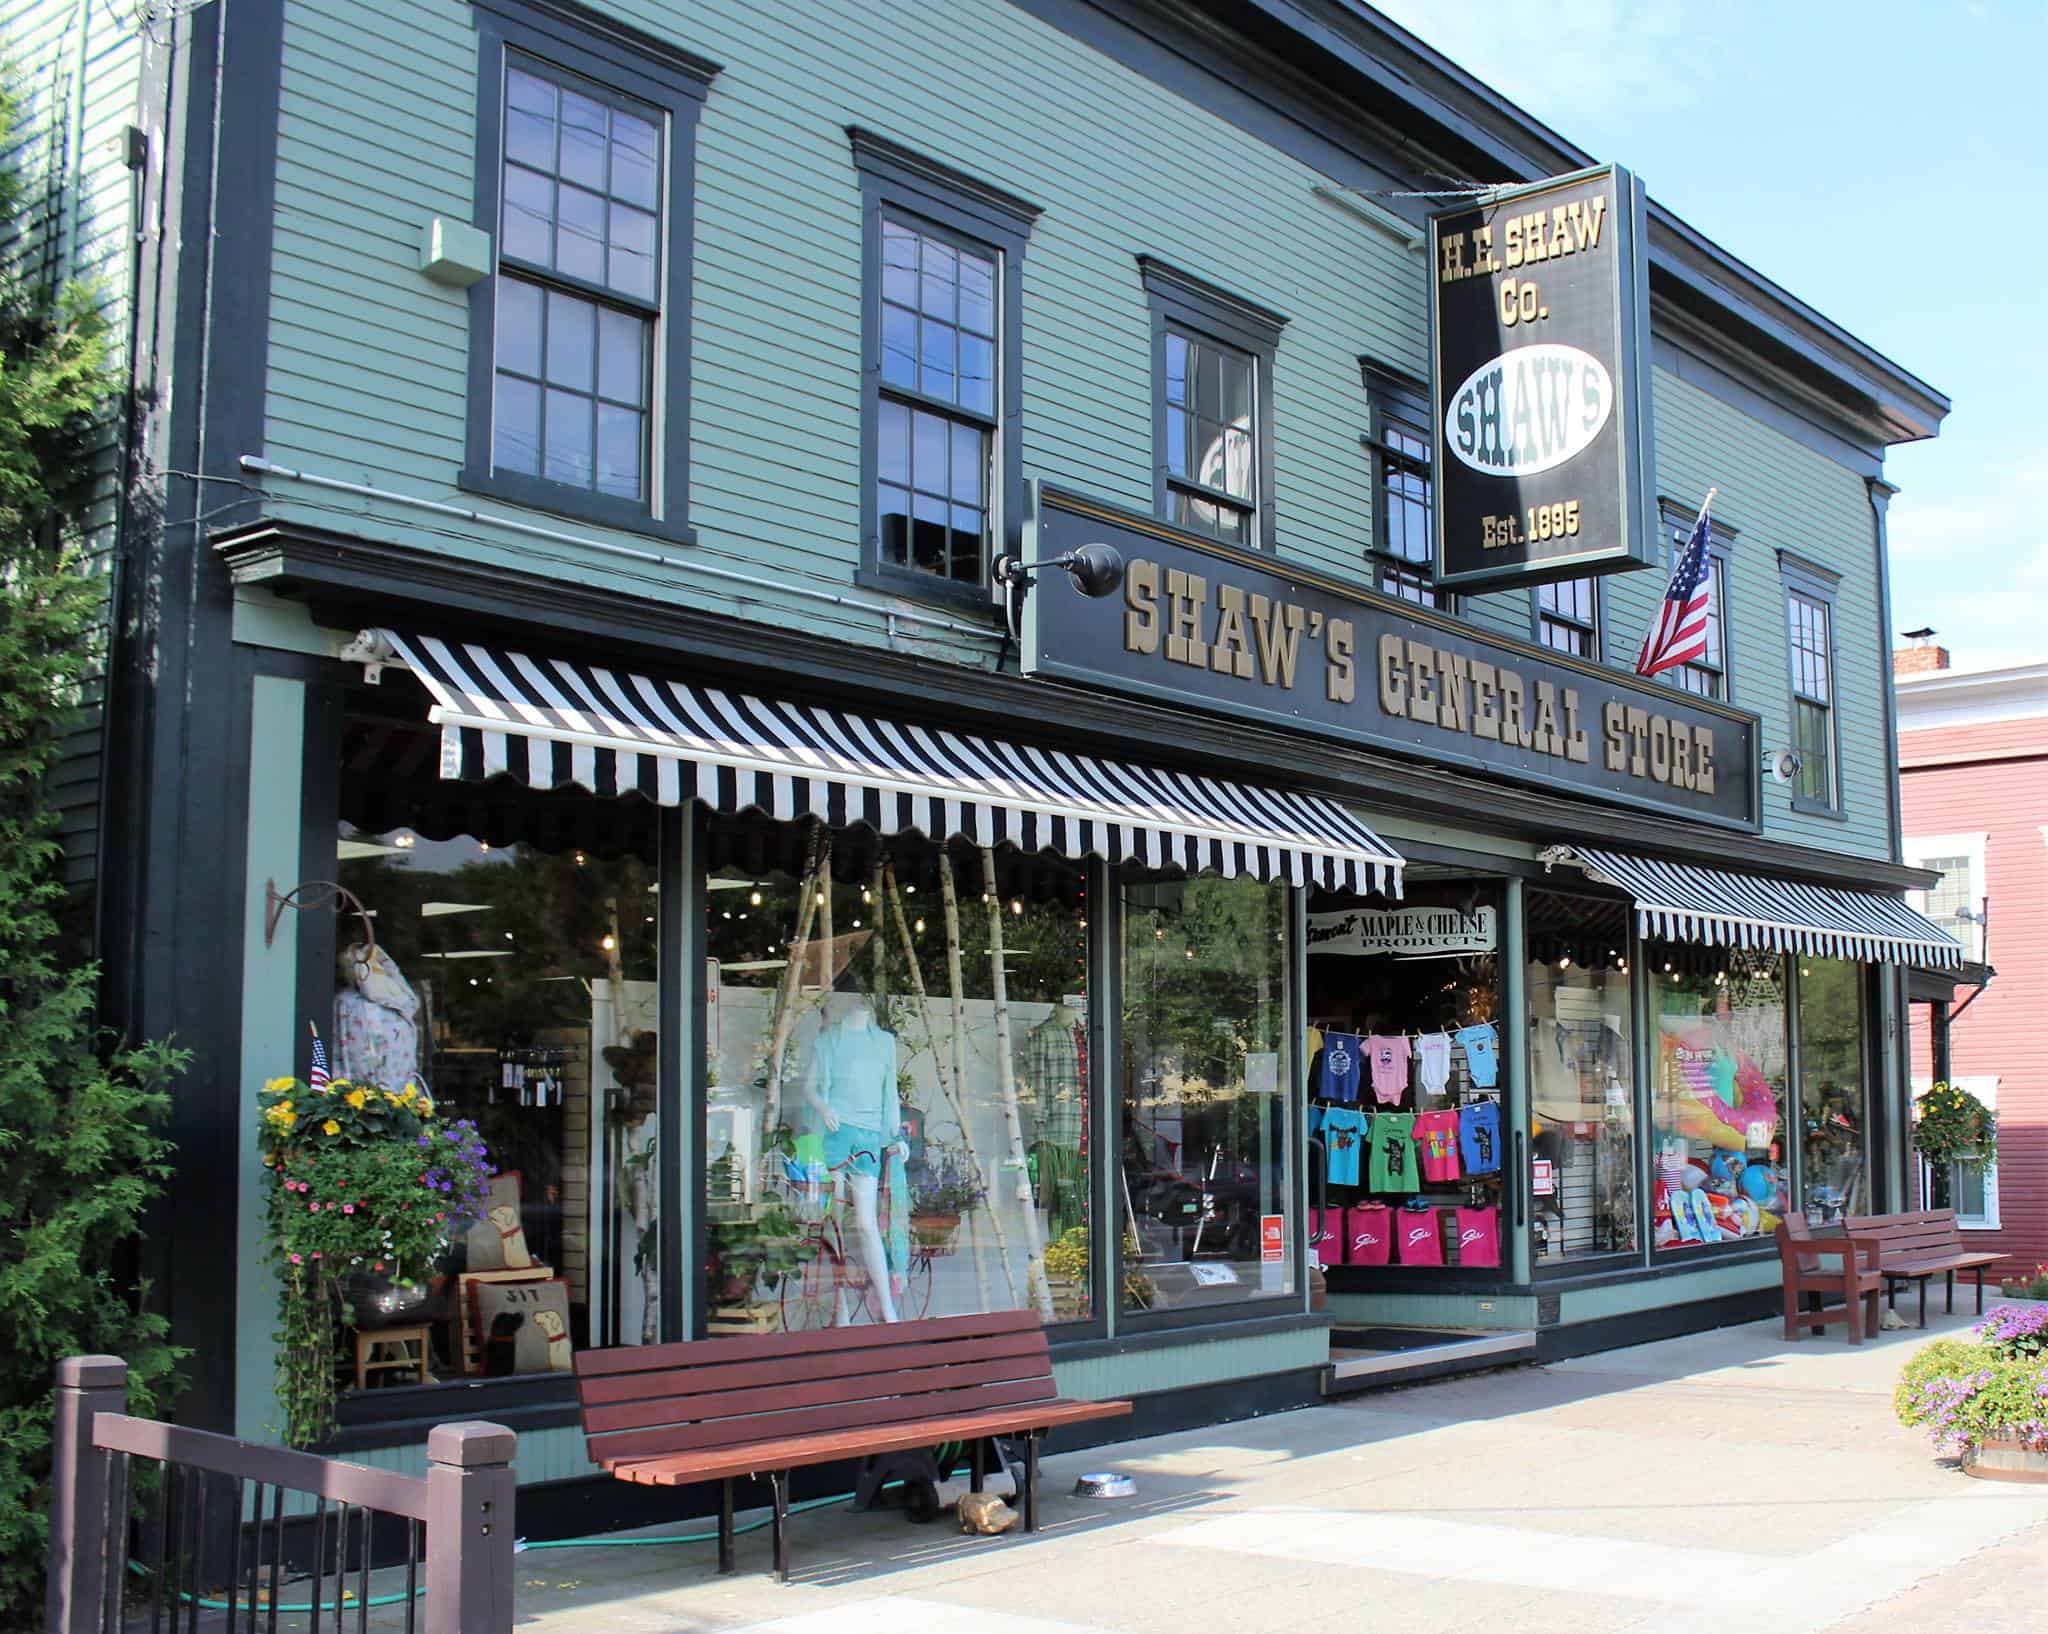 Shaws General Store Exterior During Summer with Window Displays